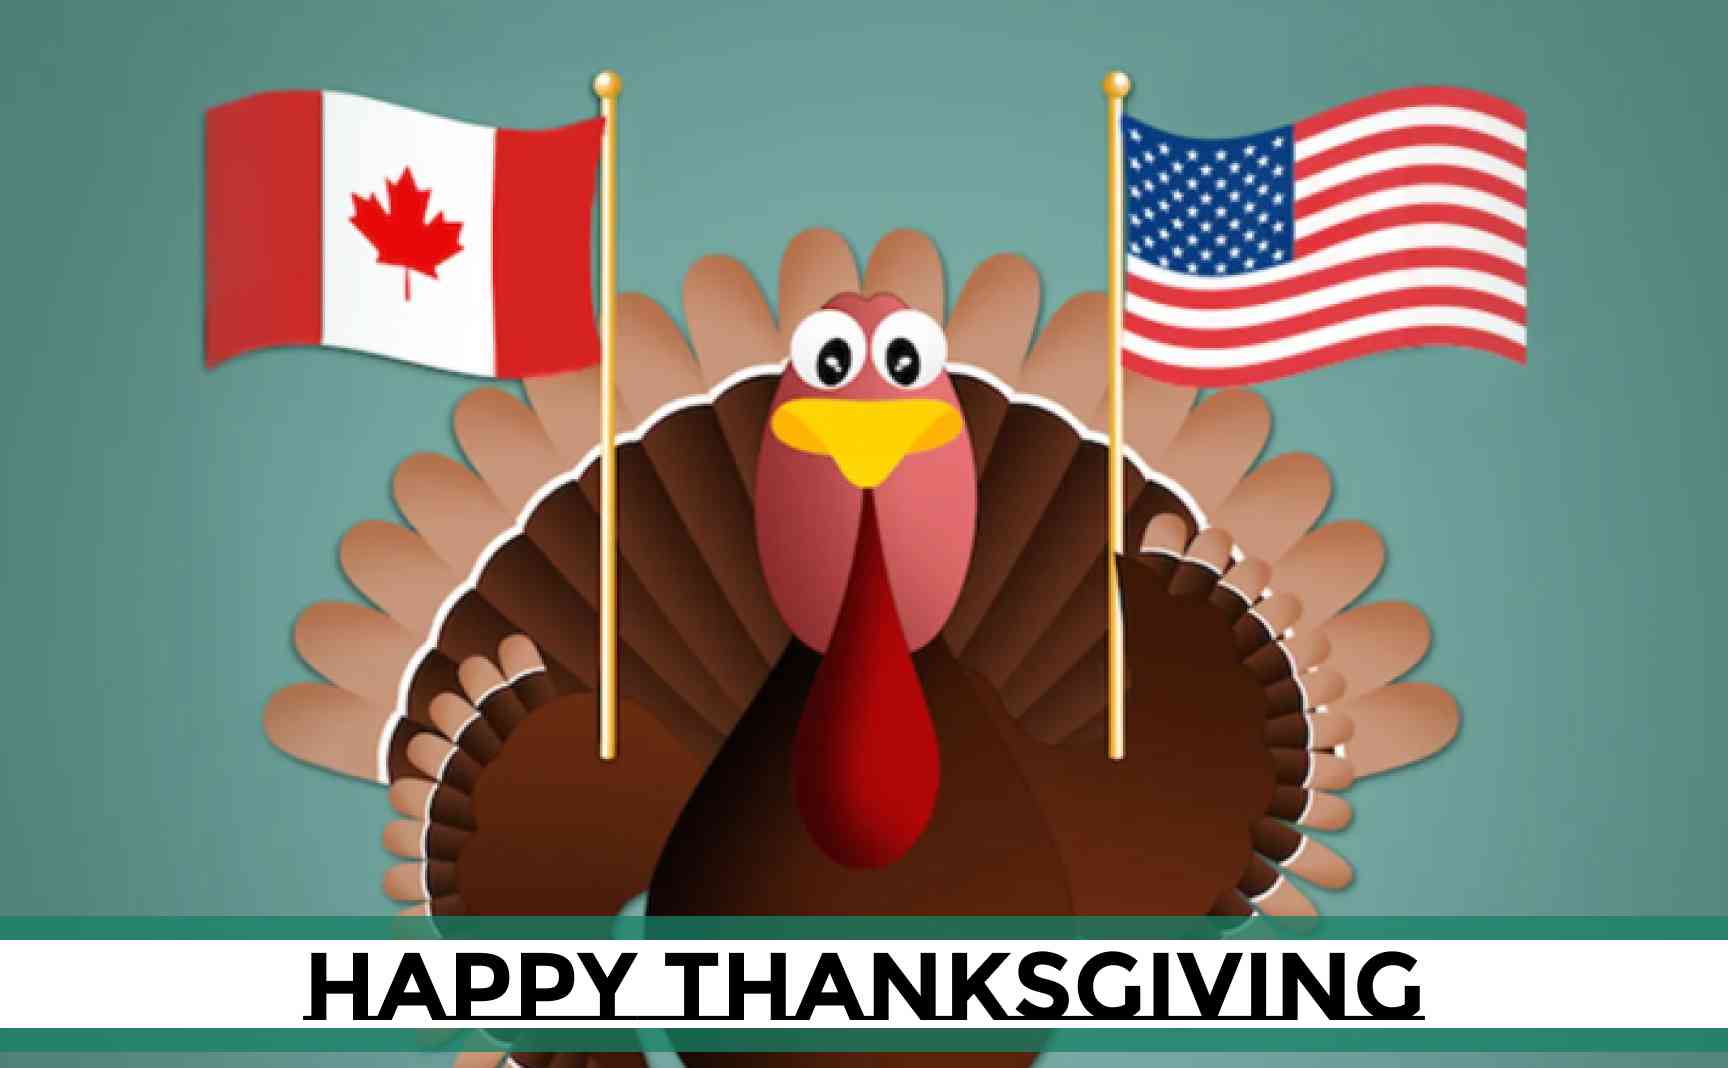 American and Canadian Thanksgiving: What Makes Them Similar or Different